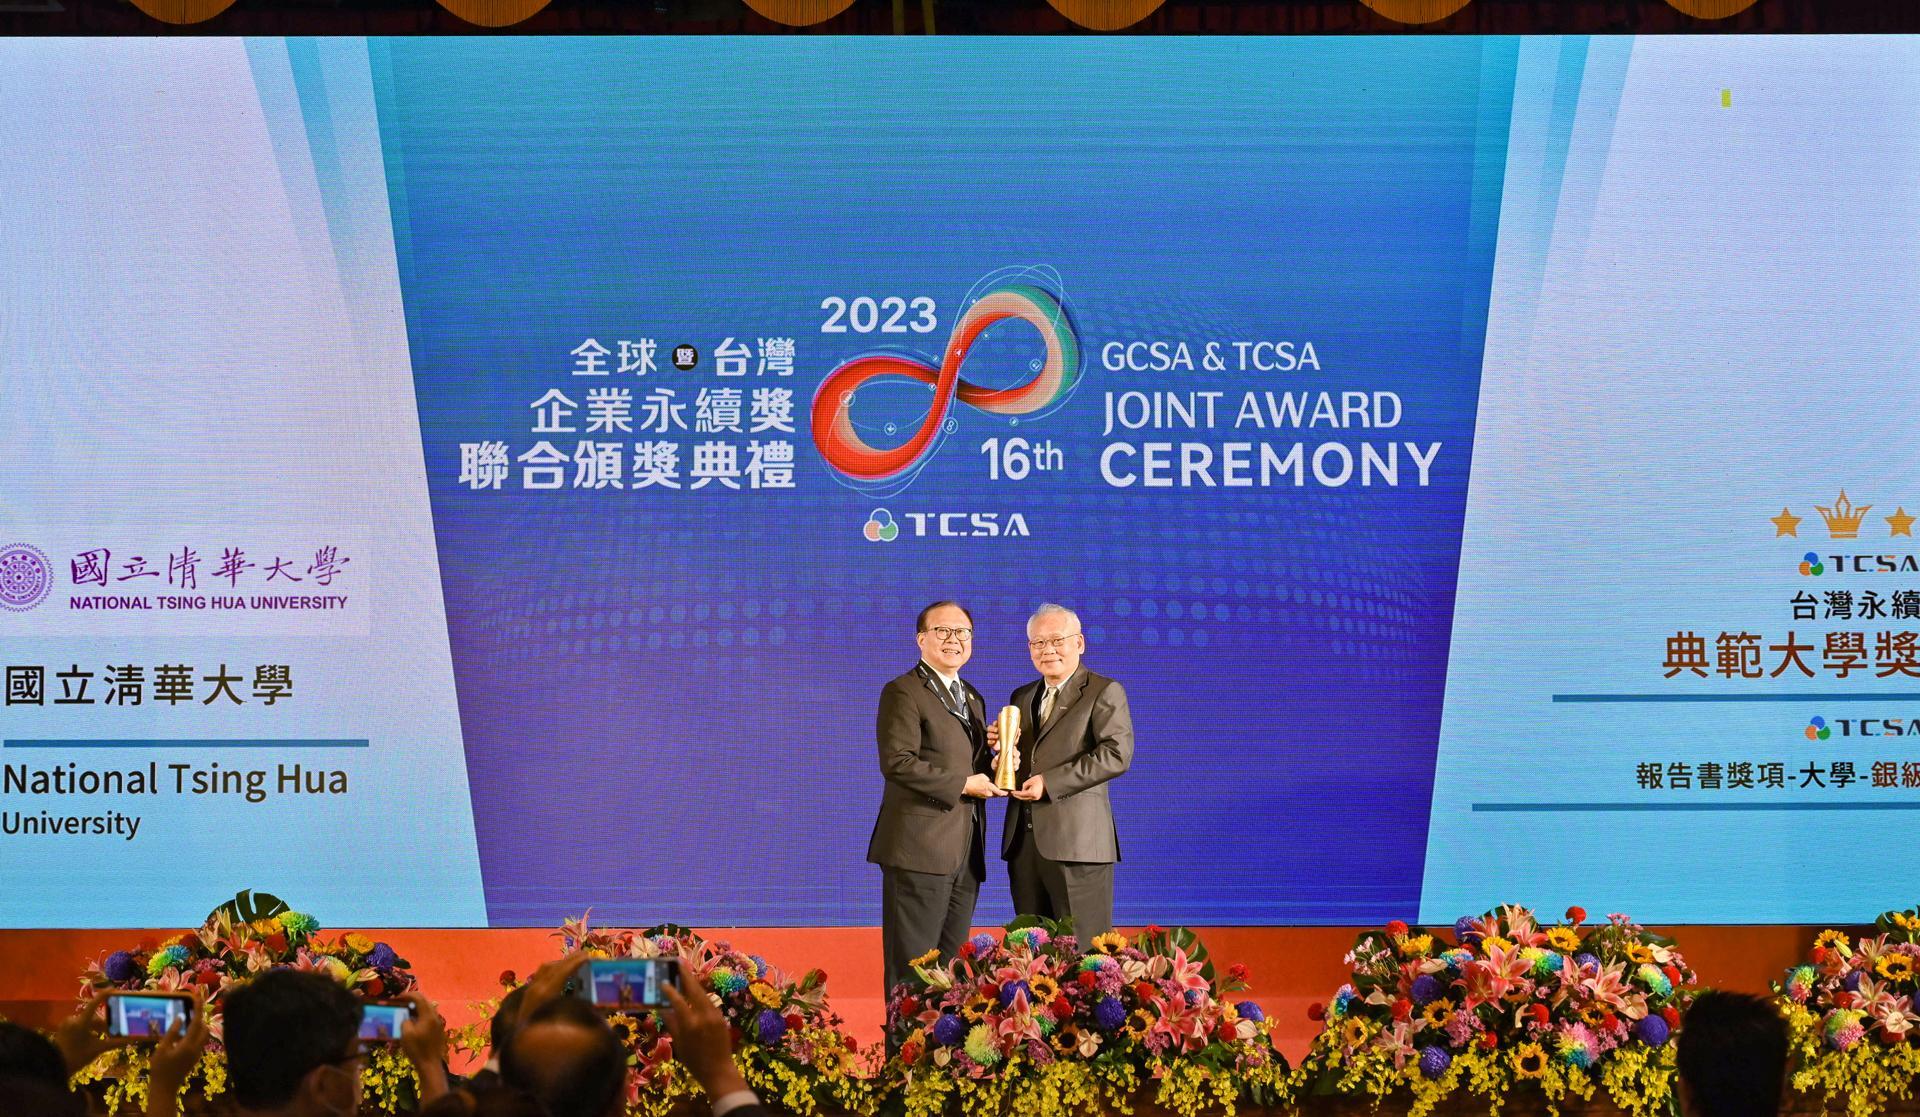 The 16th Taiwan Corporate Sustainability Awards (TCSA), hosted by the Taiwan Institute for Sustainable Energy (TAISE), took place at the Grand Hotel, Taipei on November 15. Among the 45 participating institutions, NTHU stood out and secured the top award.